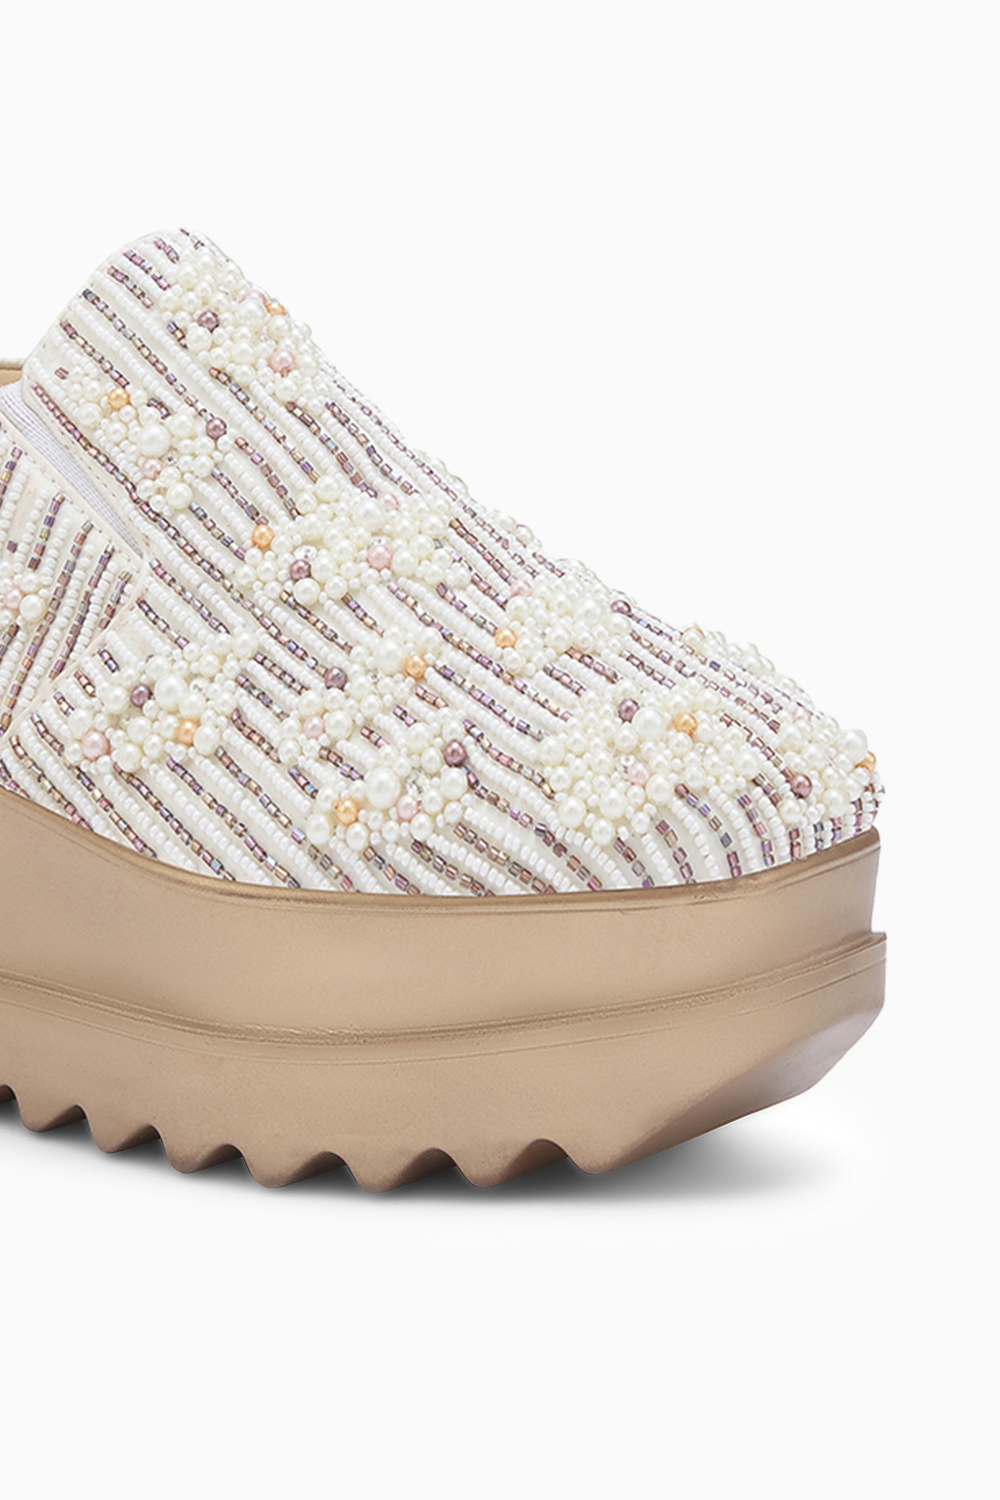 Candy Clouds Wedding Wedge Sneakers